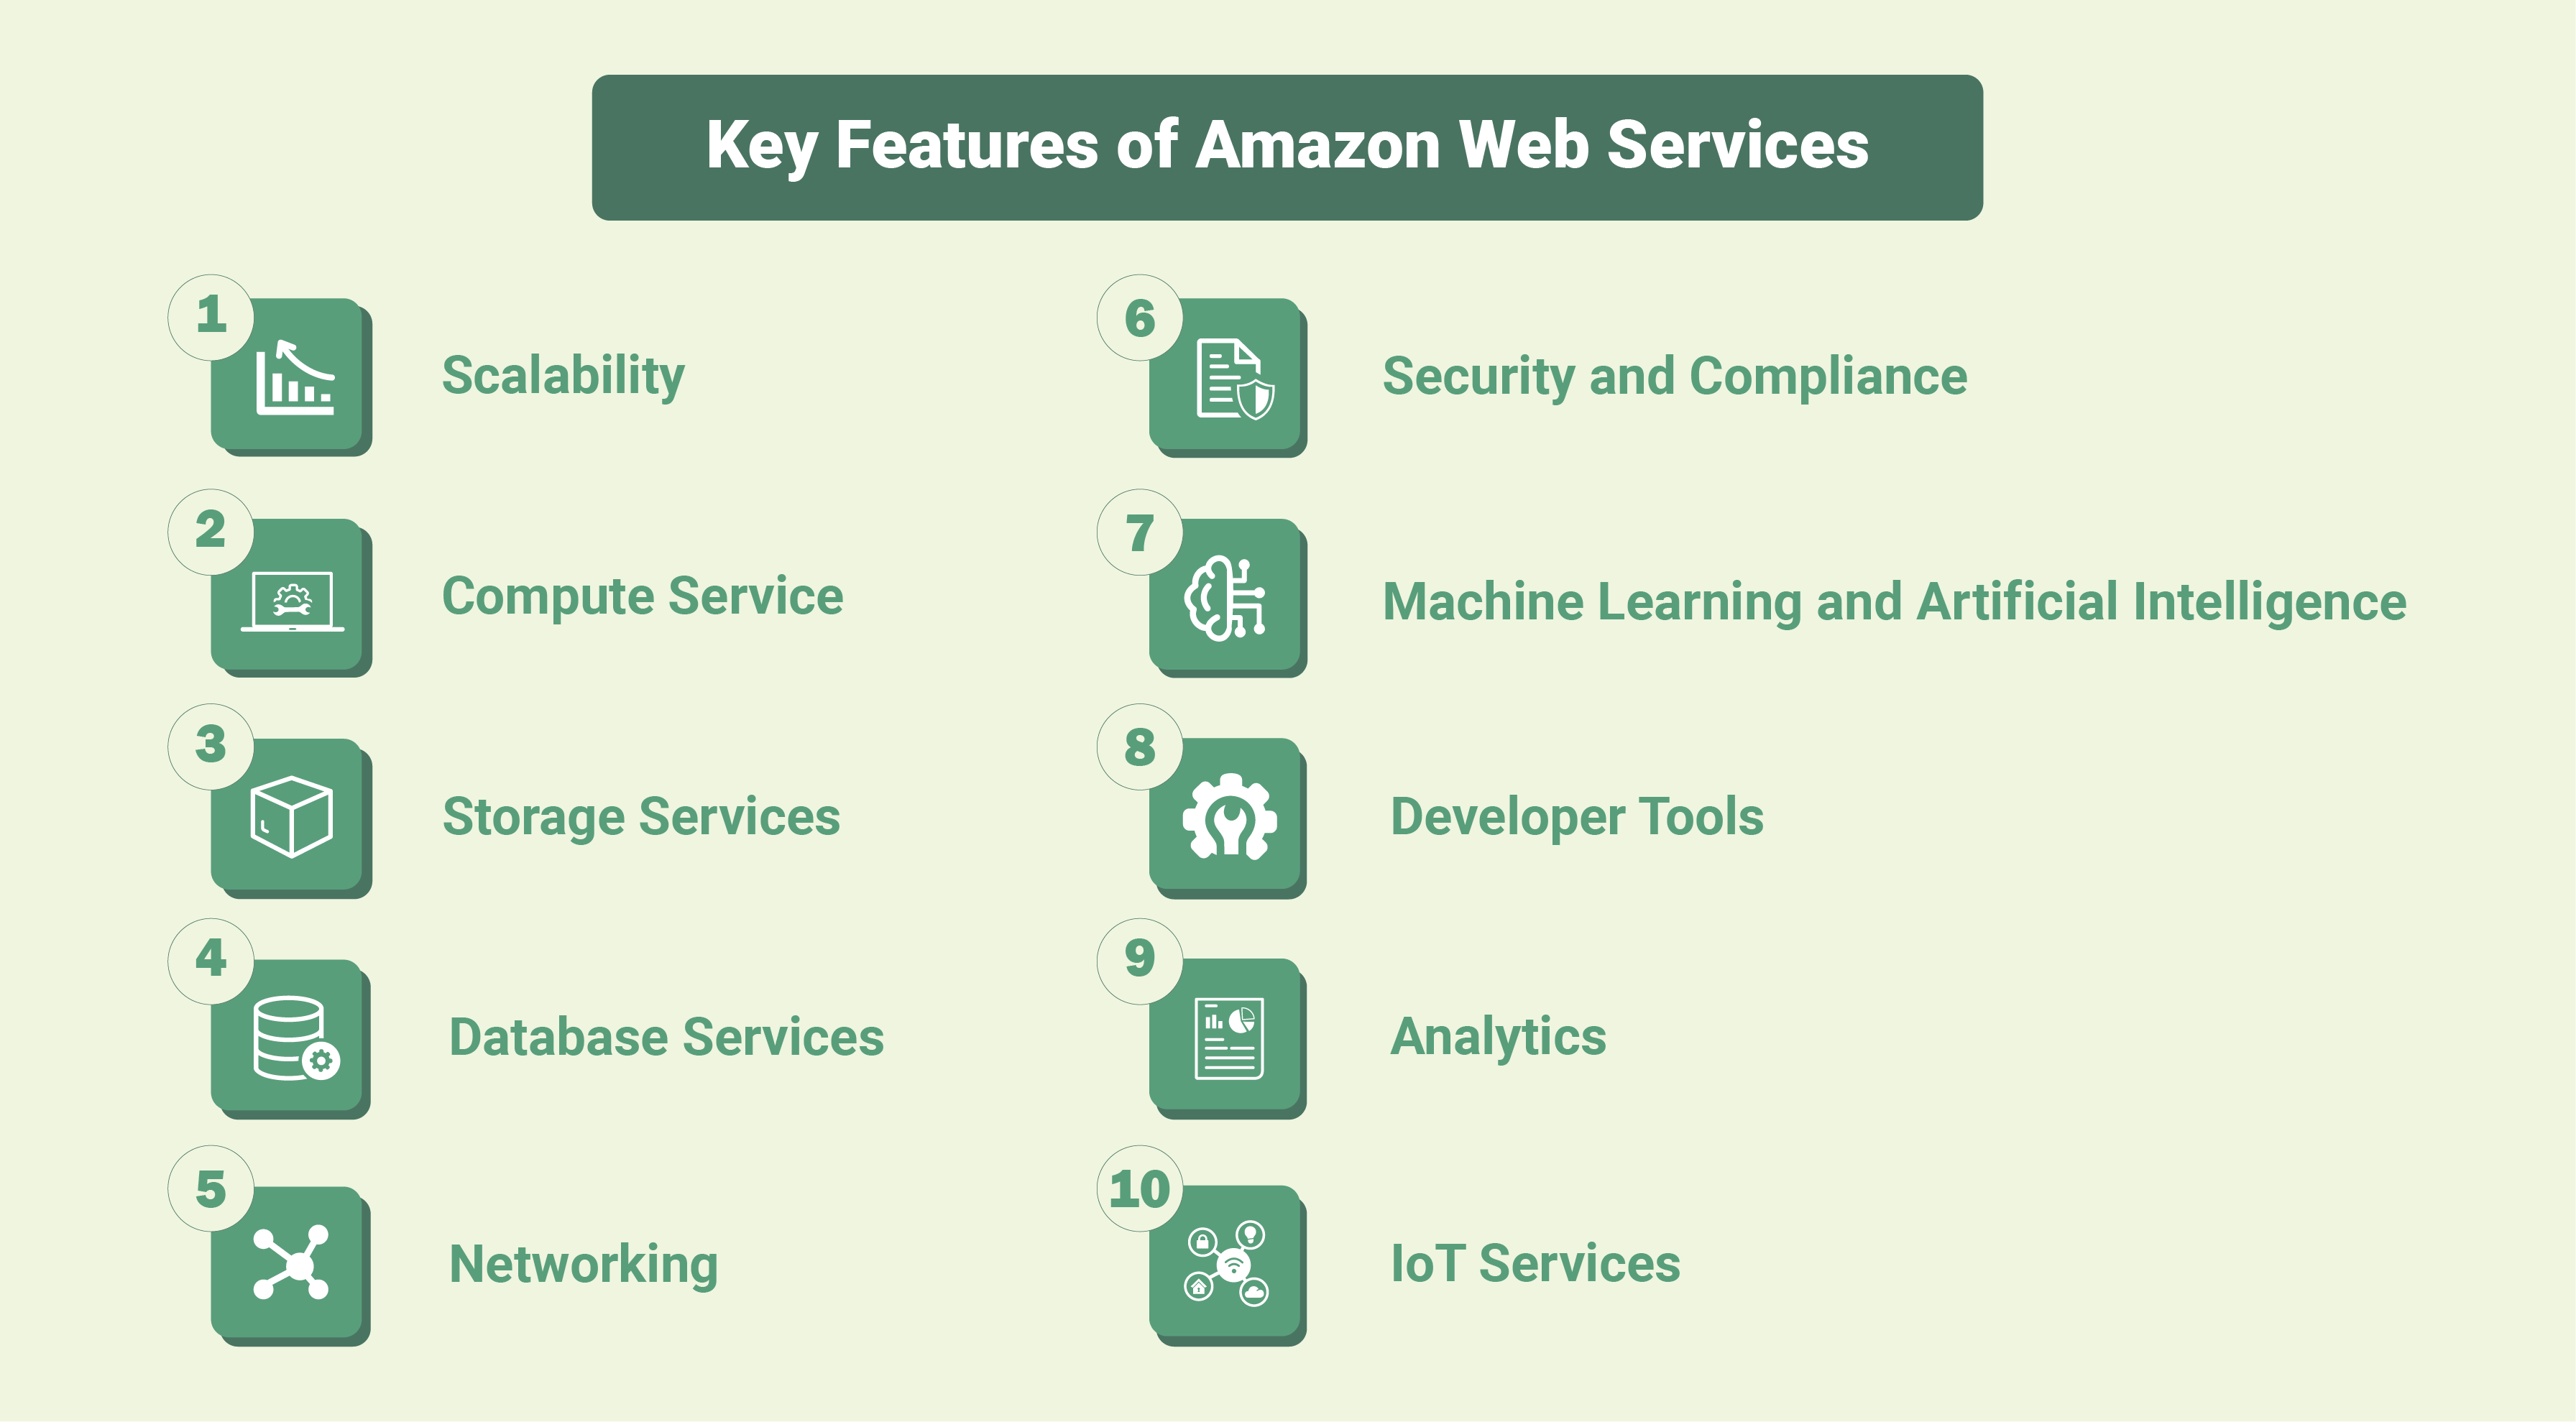 Key Features of Amazon Web Services